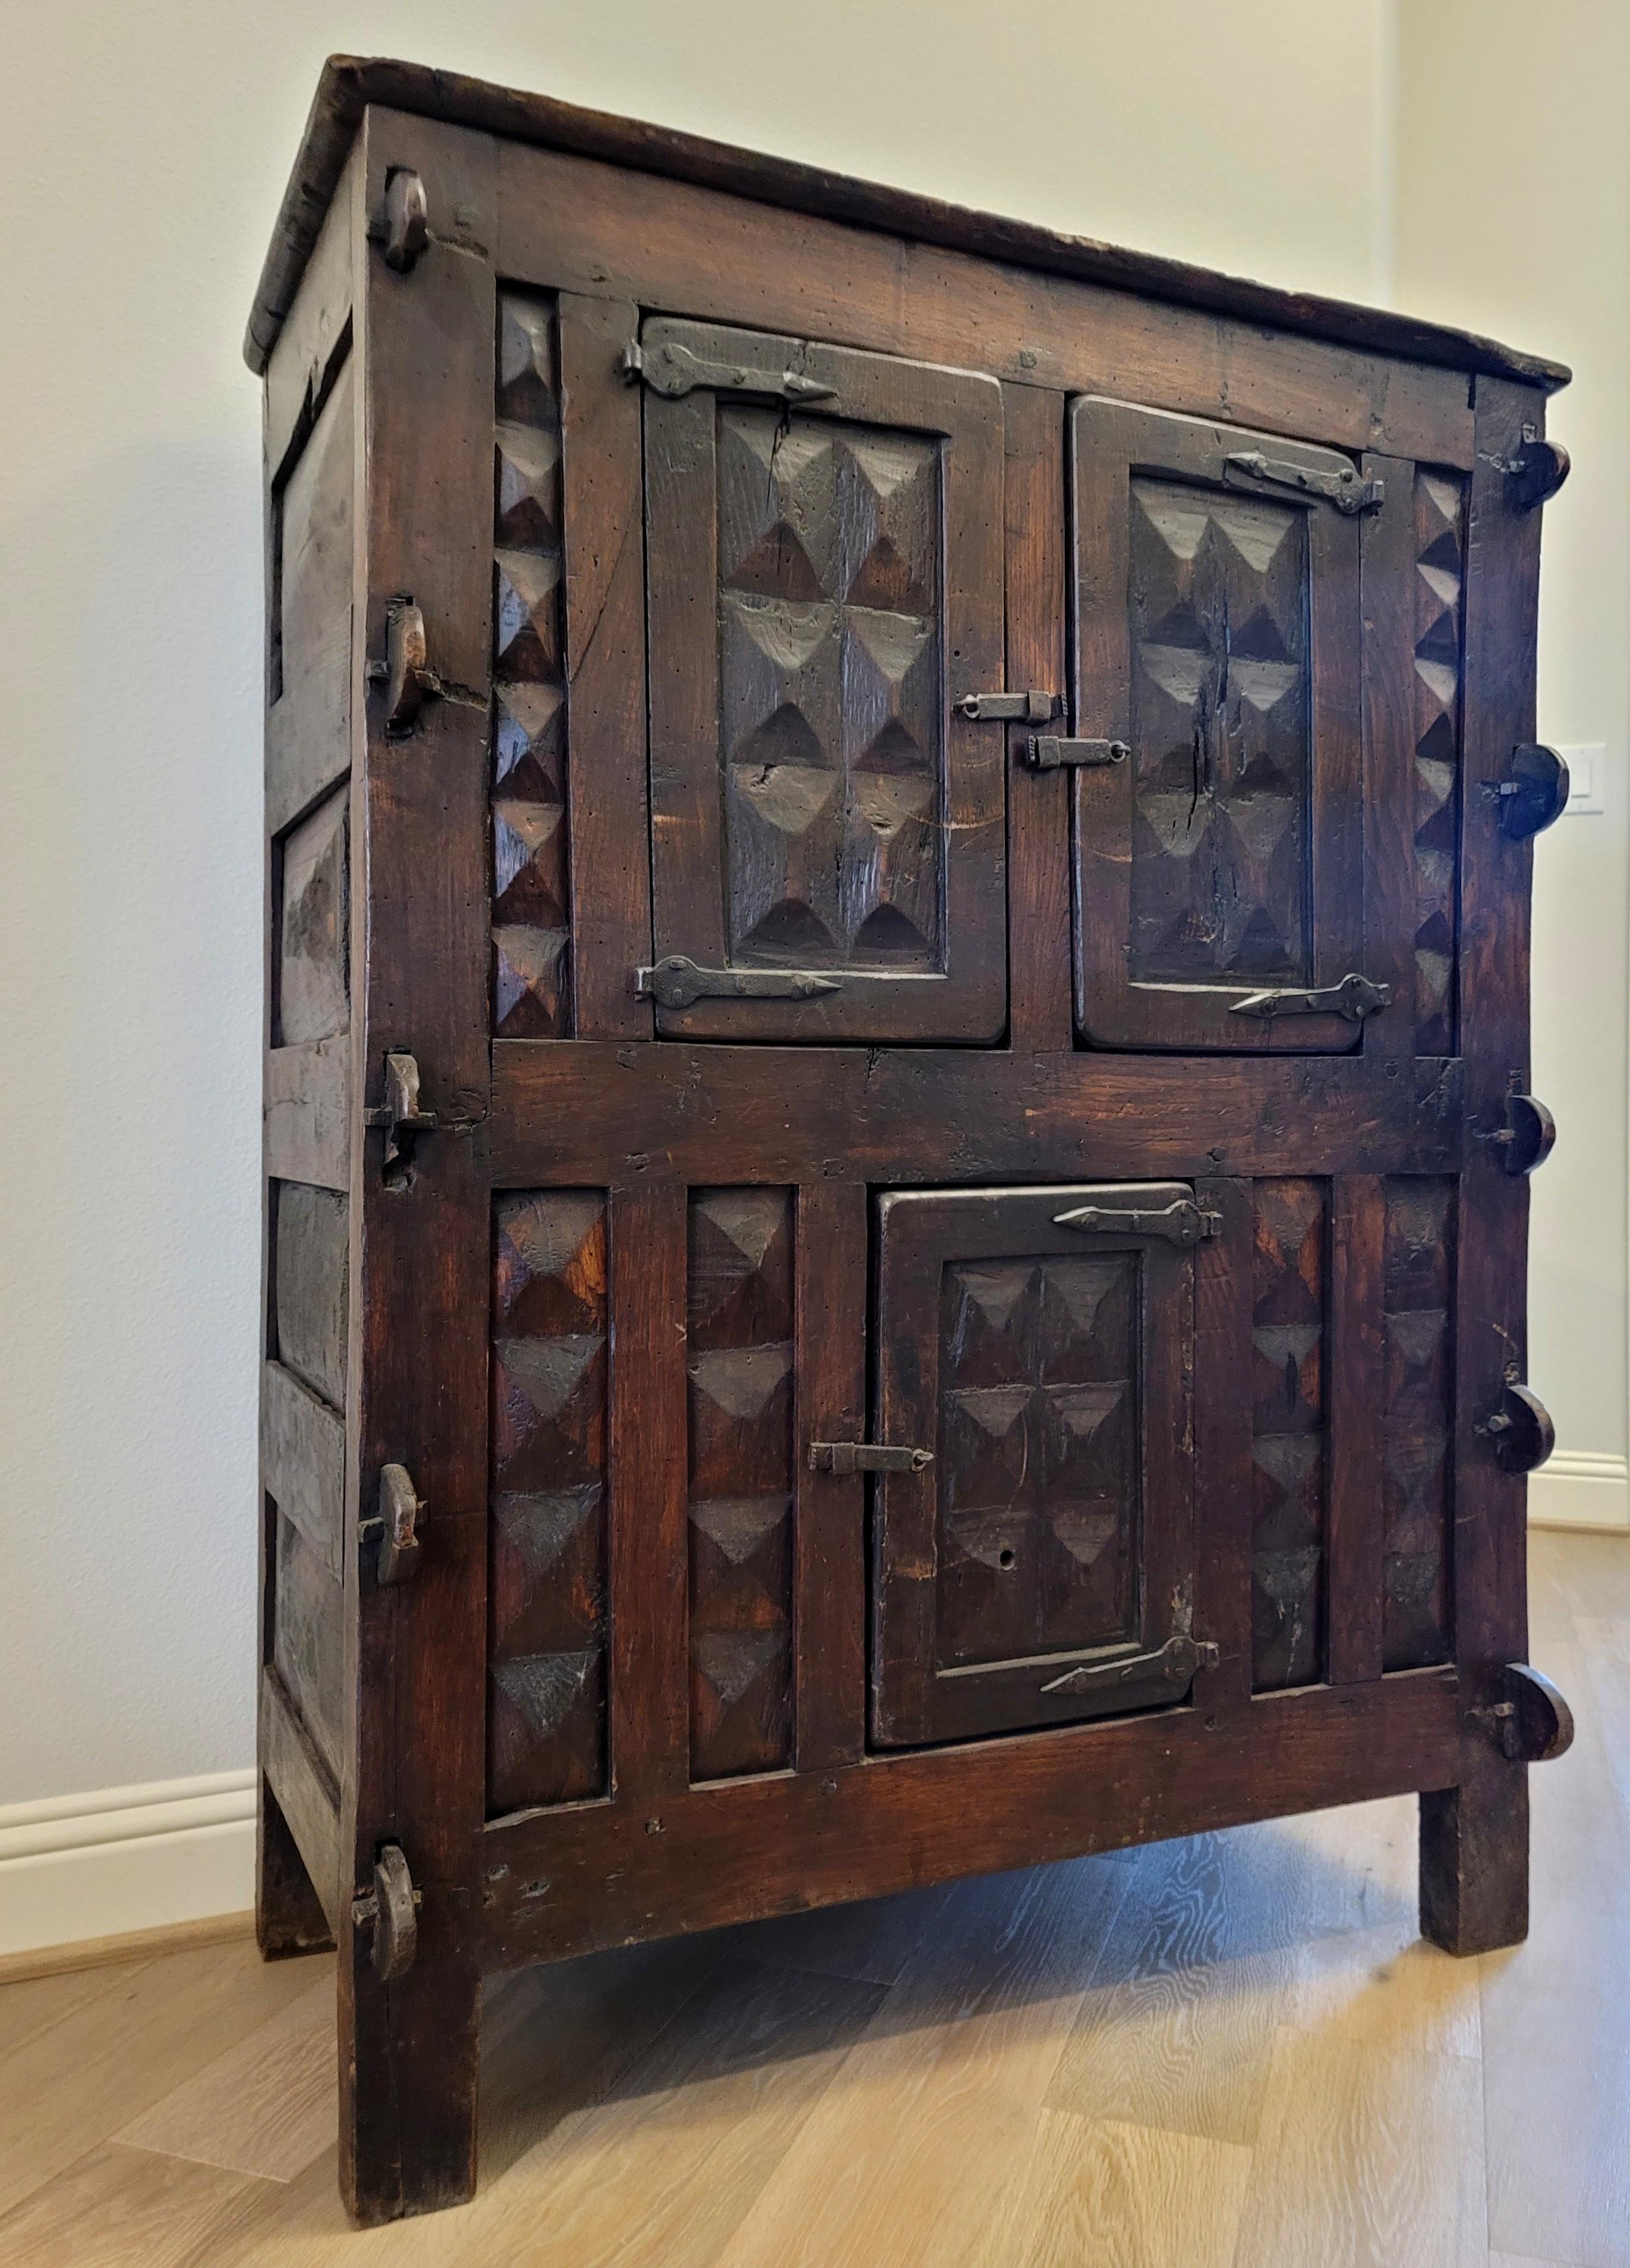 A scarce Baroque period Continental Europe country farmhouse cabinet or kitchen cupboard, displaying lots of charming antique character, warmth and beautiful dark rich patina!

Born in the 18th century, likely originating in the Iberian Peninsula